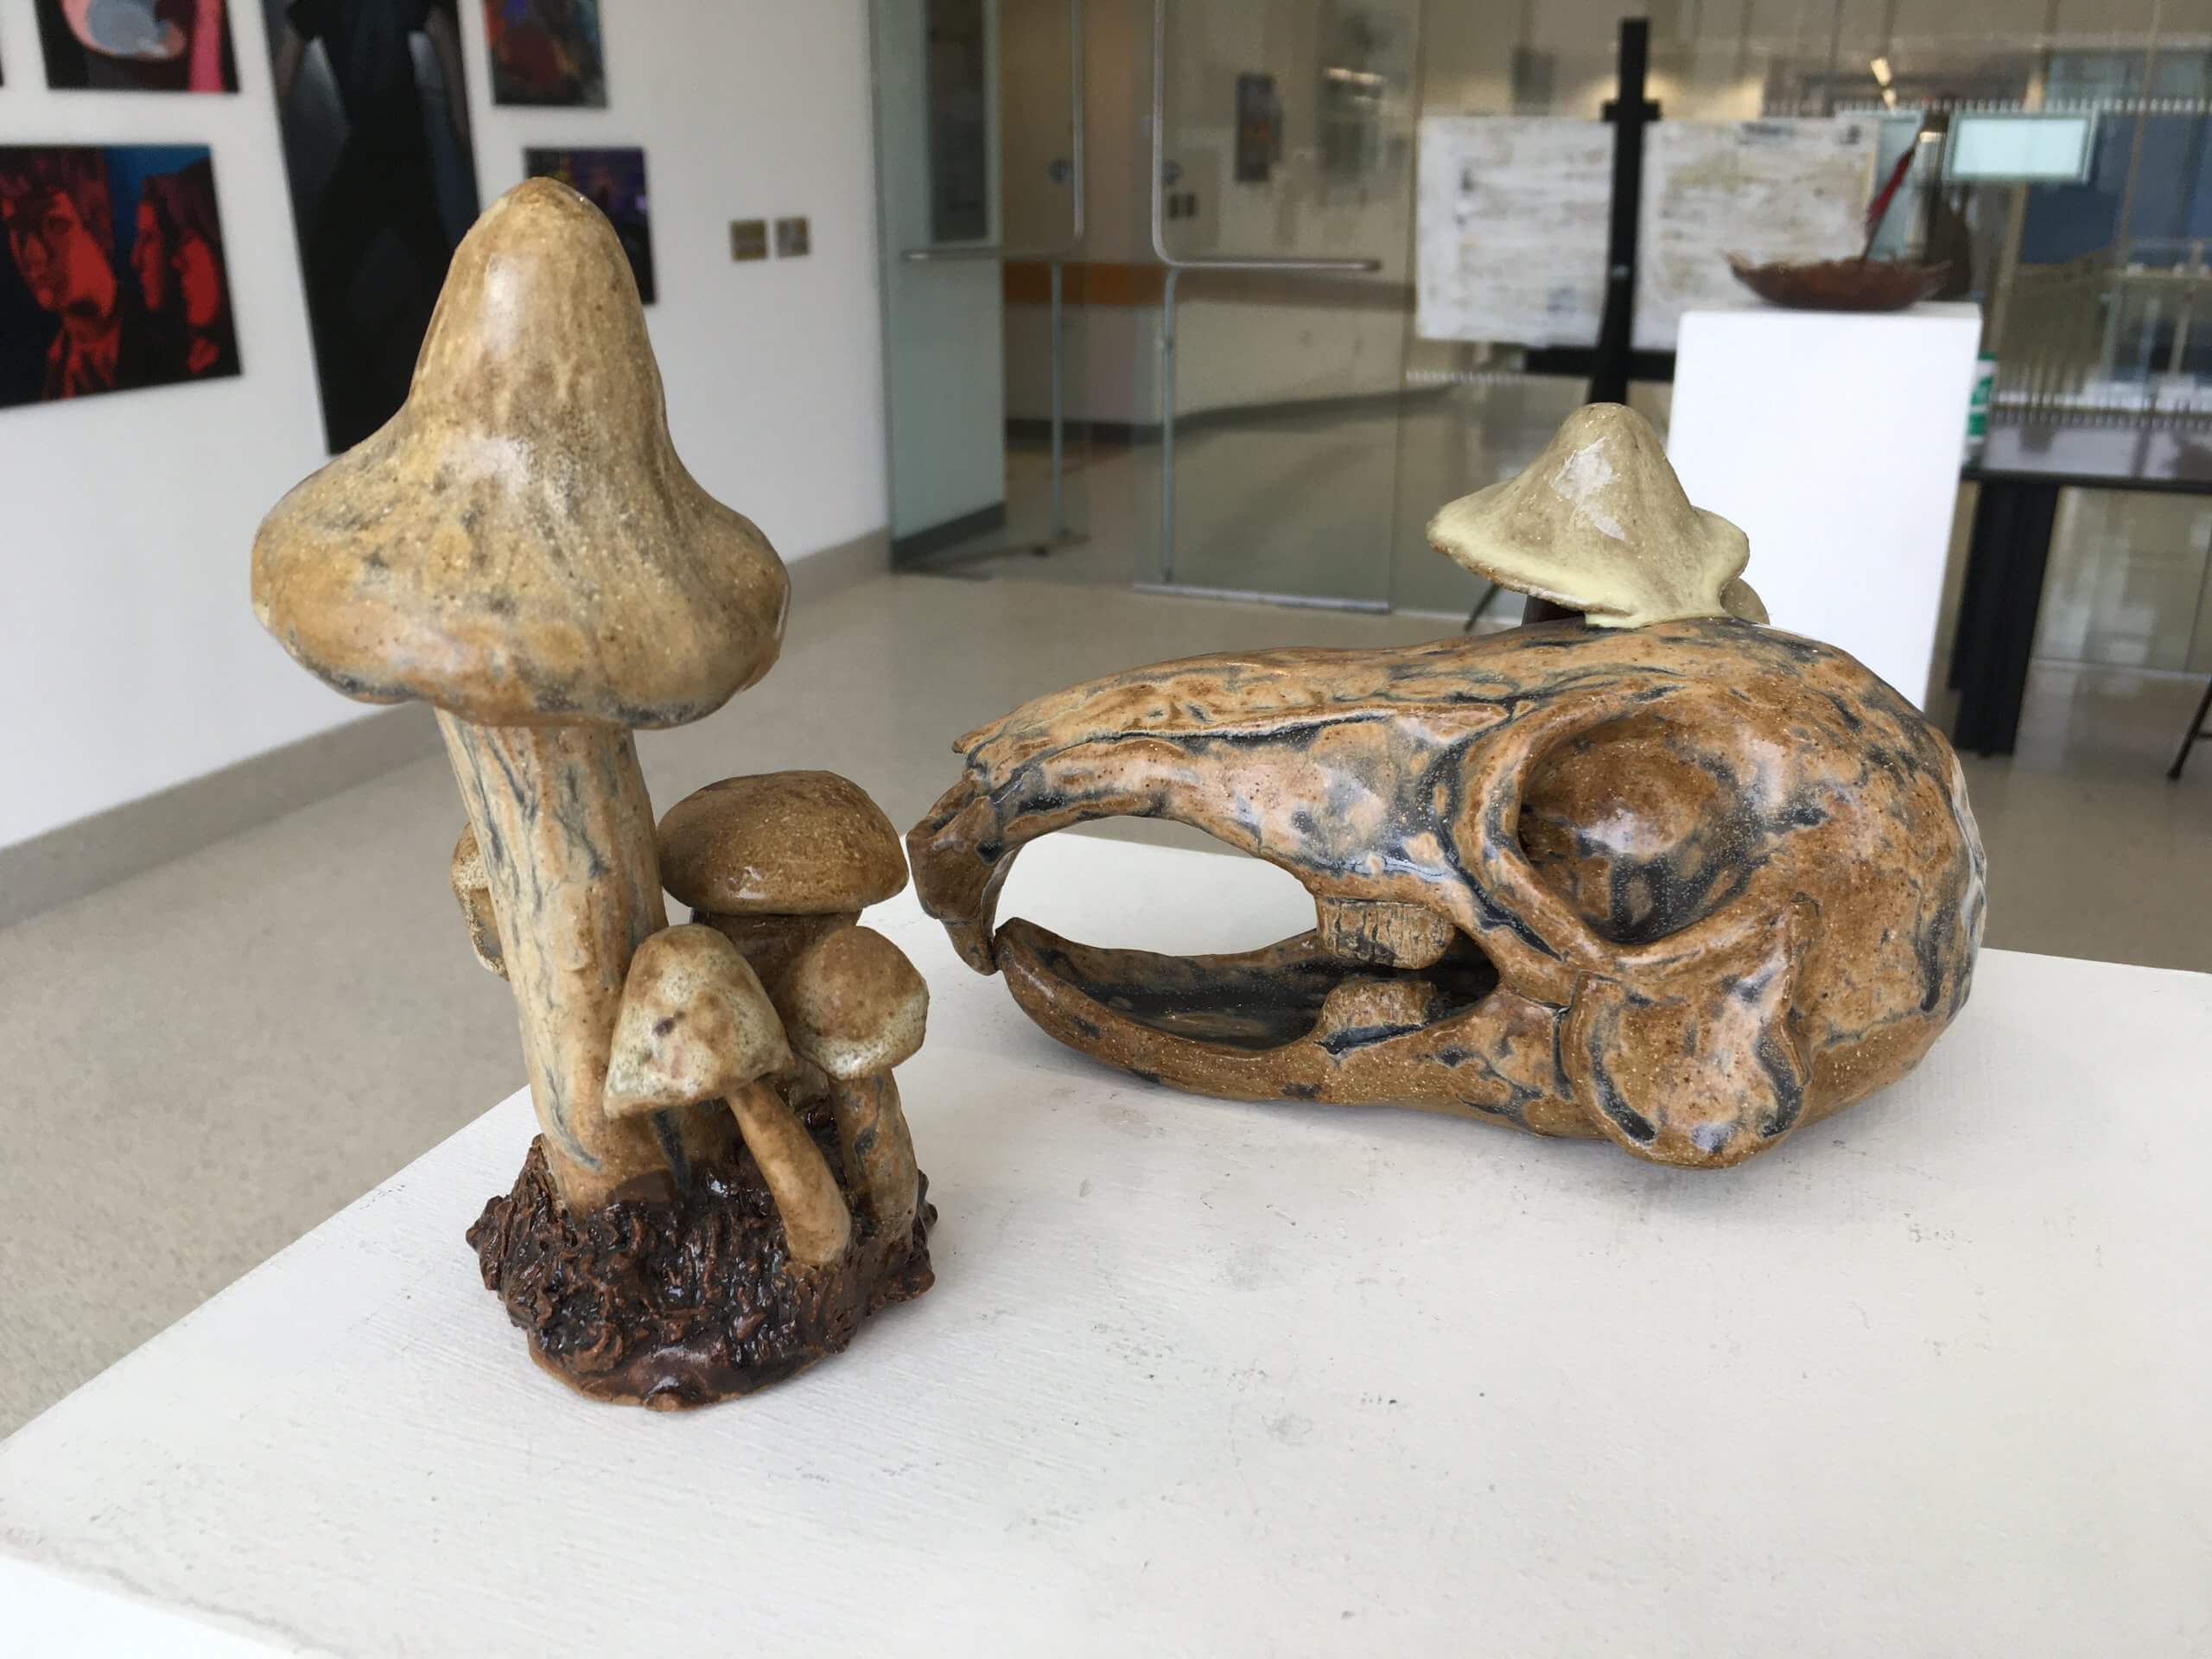 Makayla Richardson, "Fungi Pipe (Right) Death is Not the End" (Left), 2" x 5" (Right) 4.5" x 7" (Left)